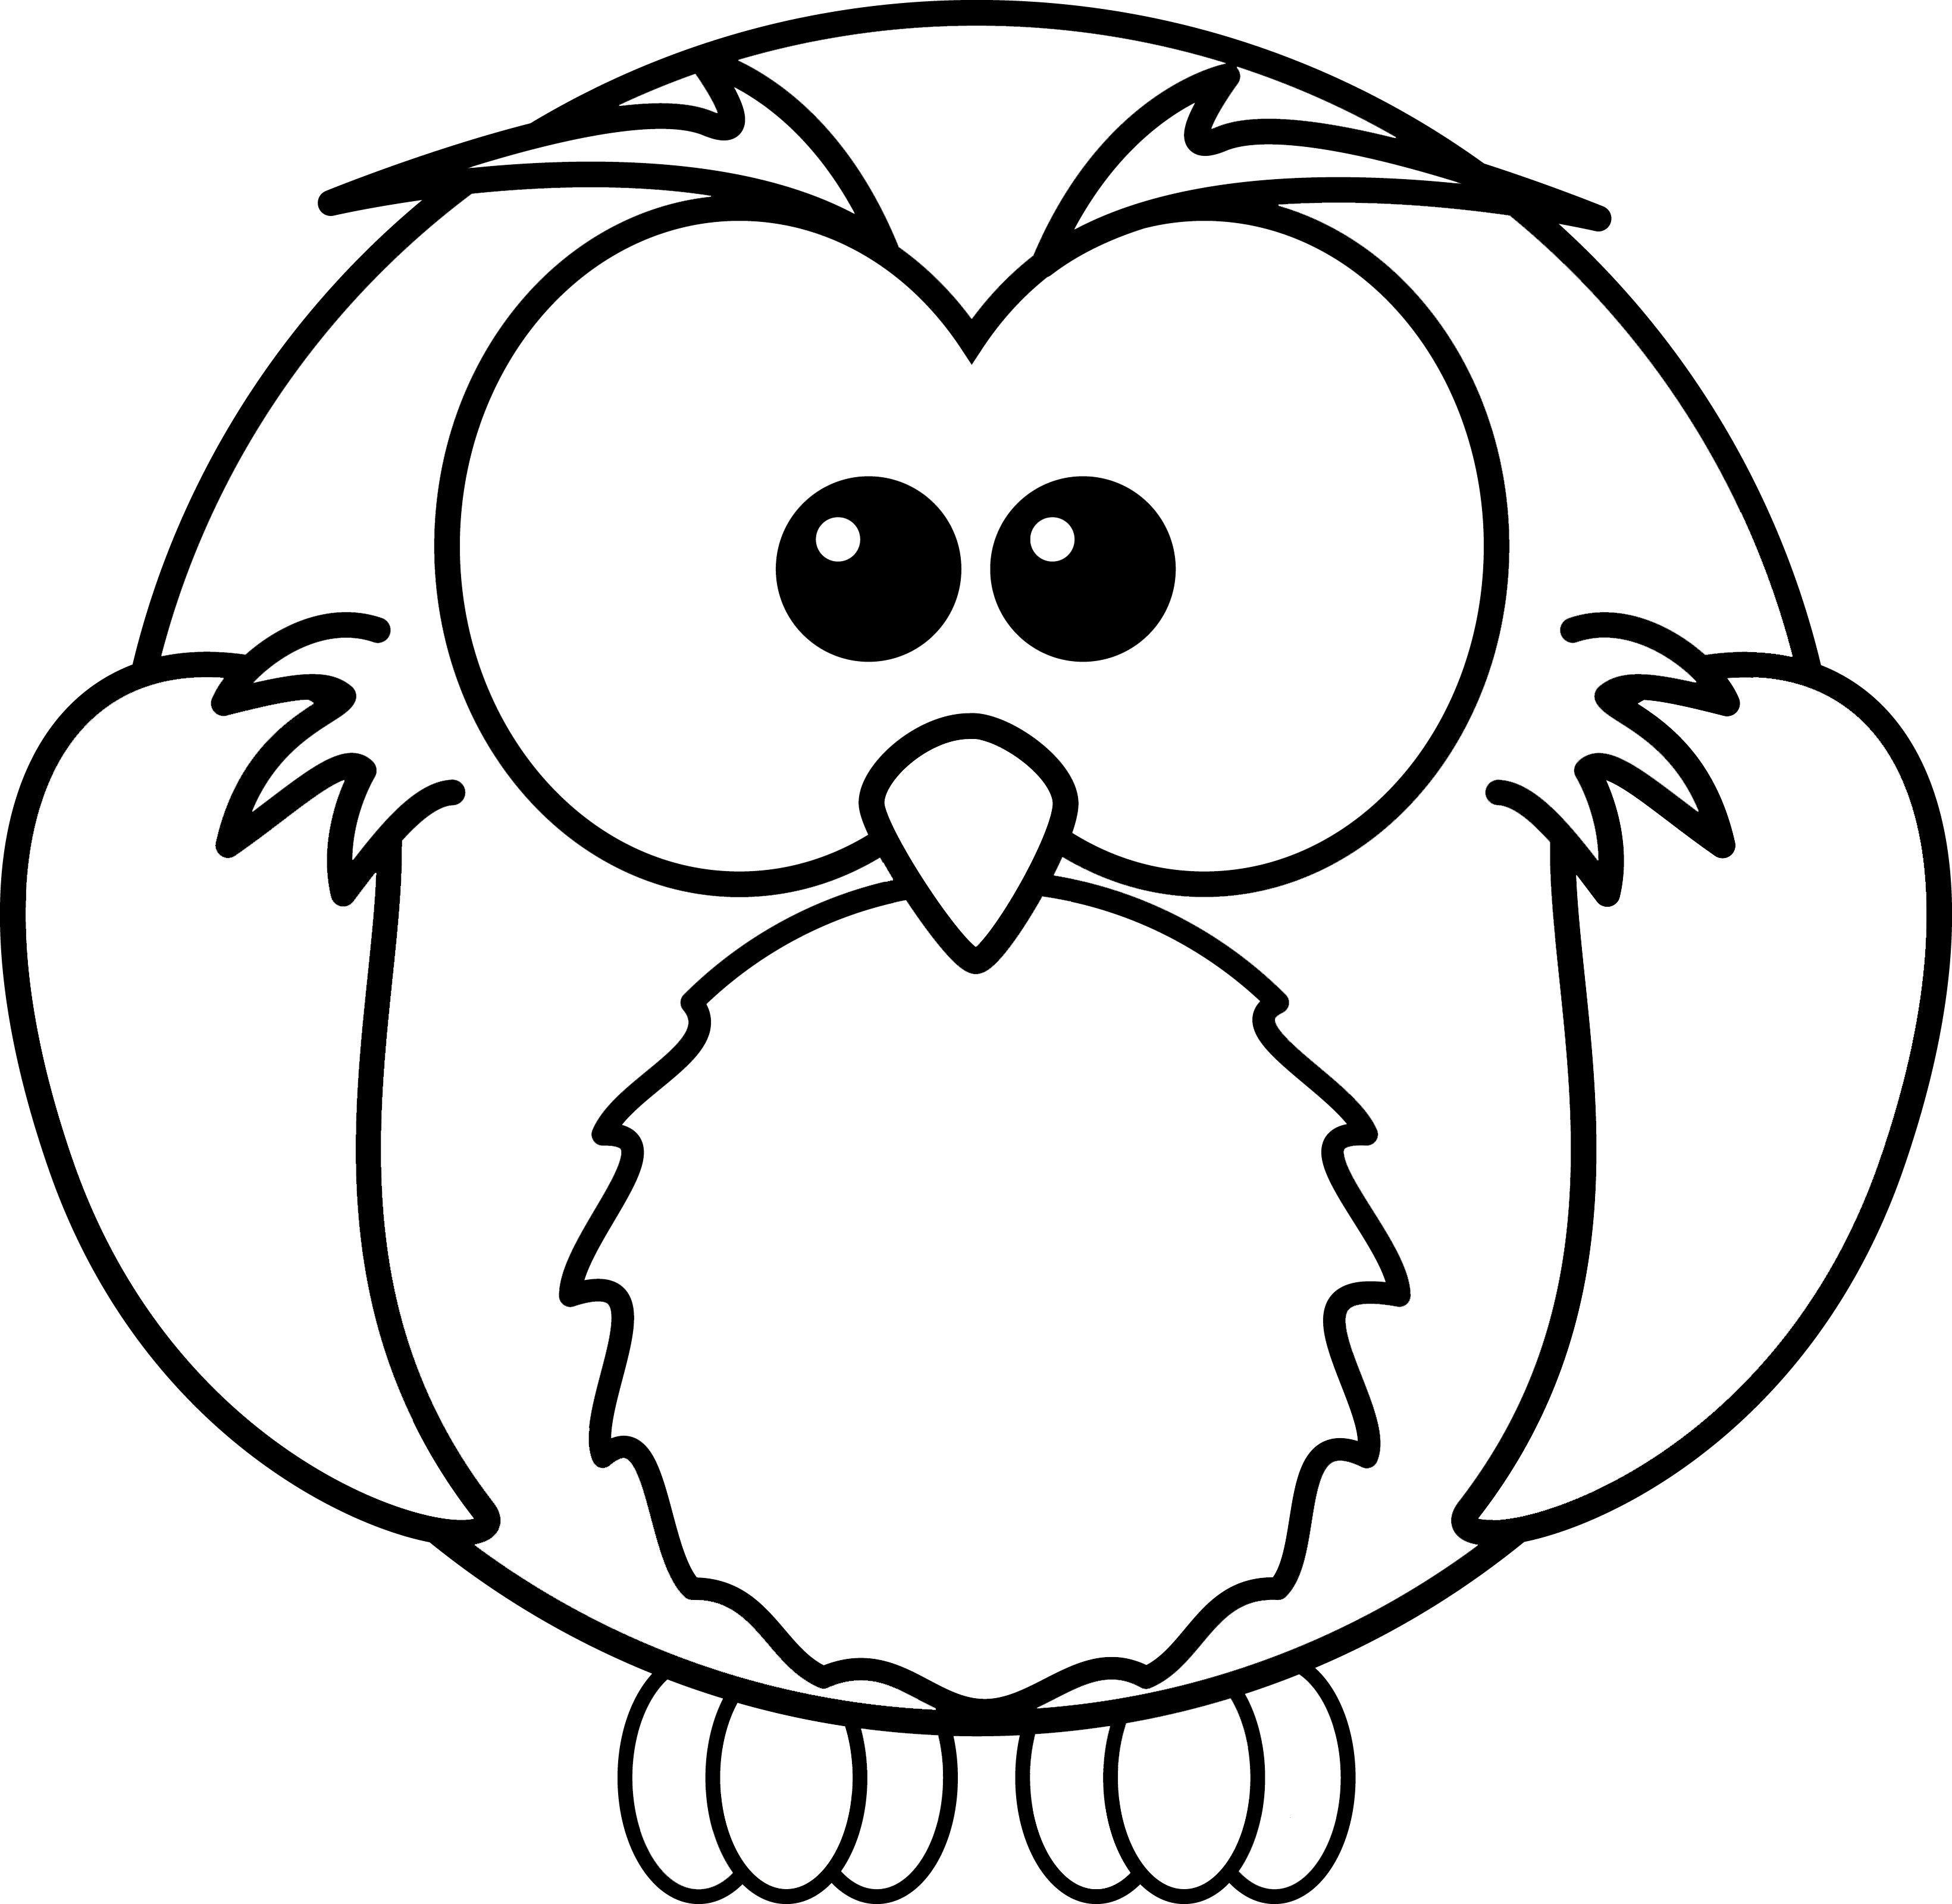 owl coloring pg owl coloring pages | Printable Coloring